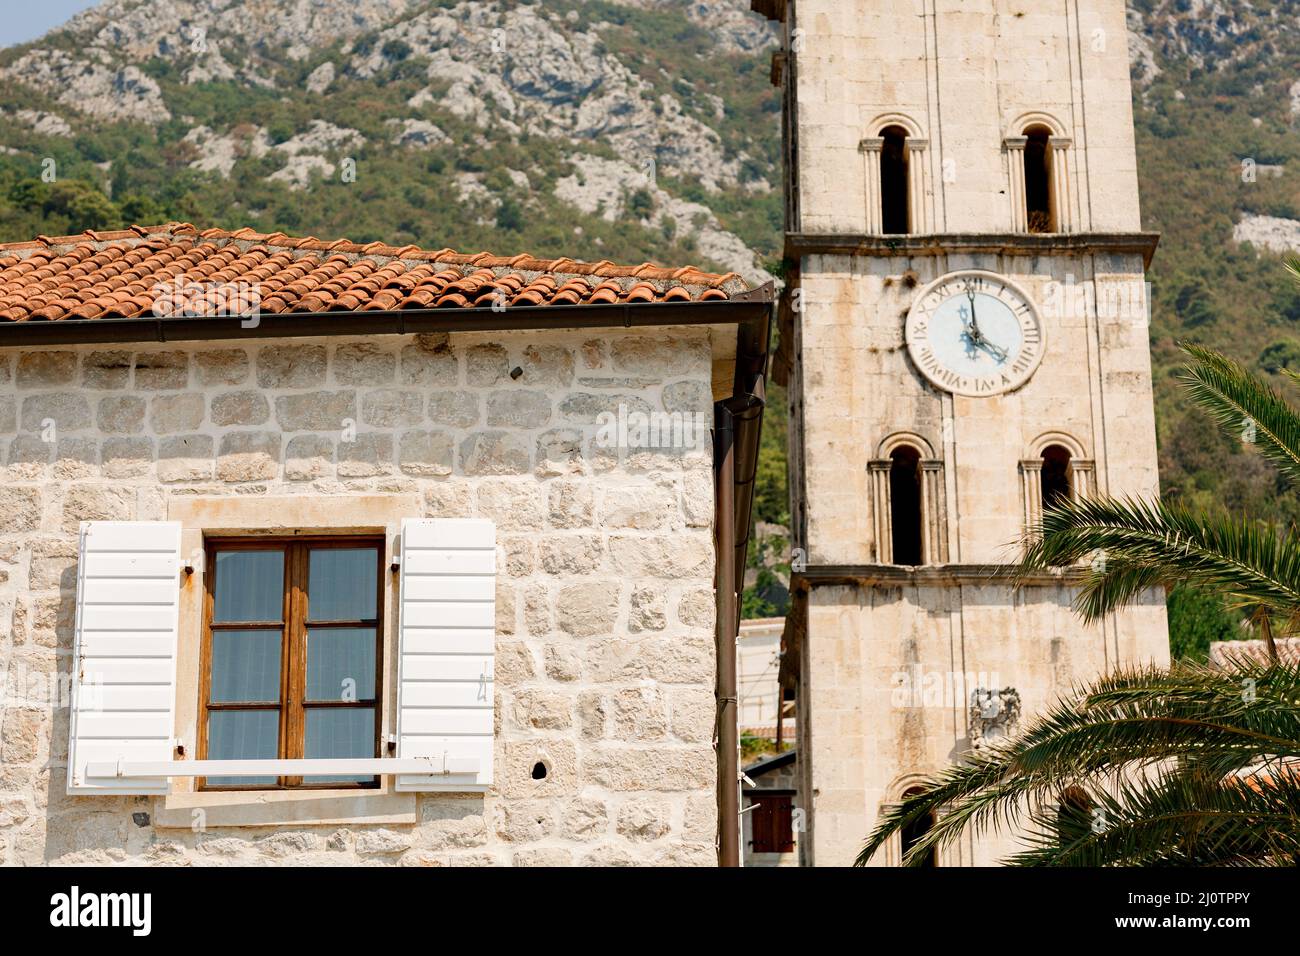 Church of St. Nicholas and a bell tower with a clock. Perast, Montenegro Stock Photo